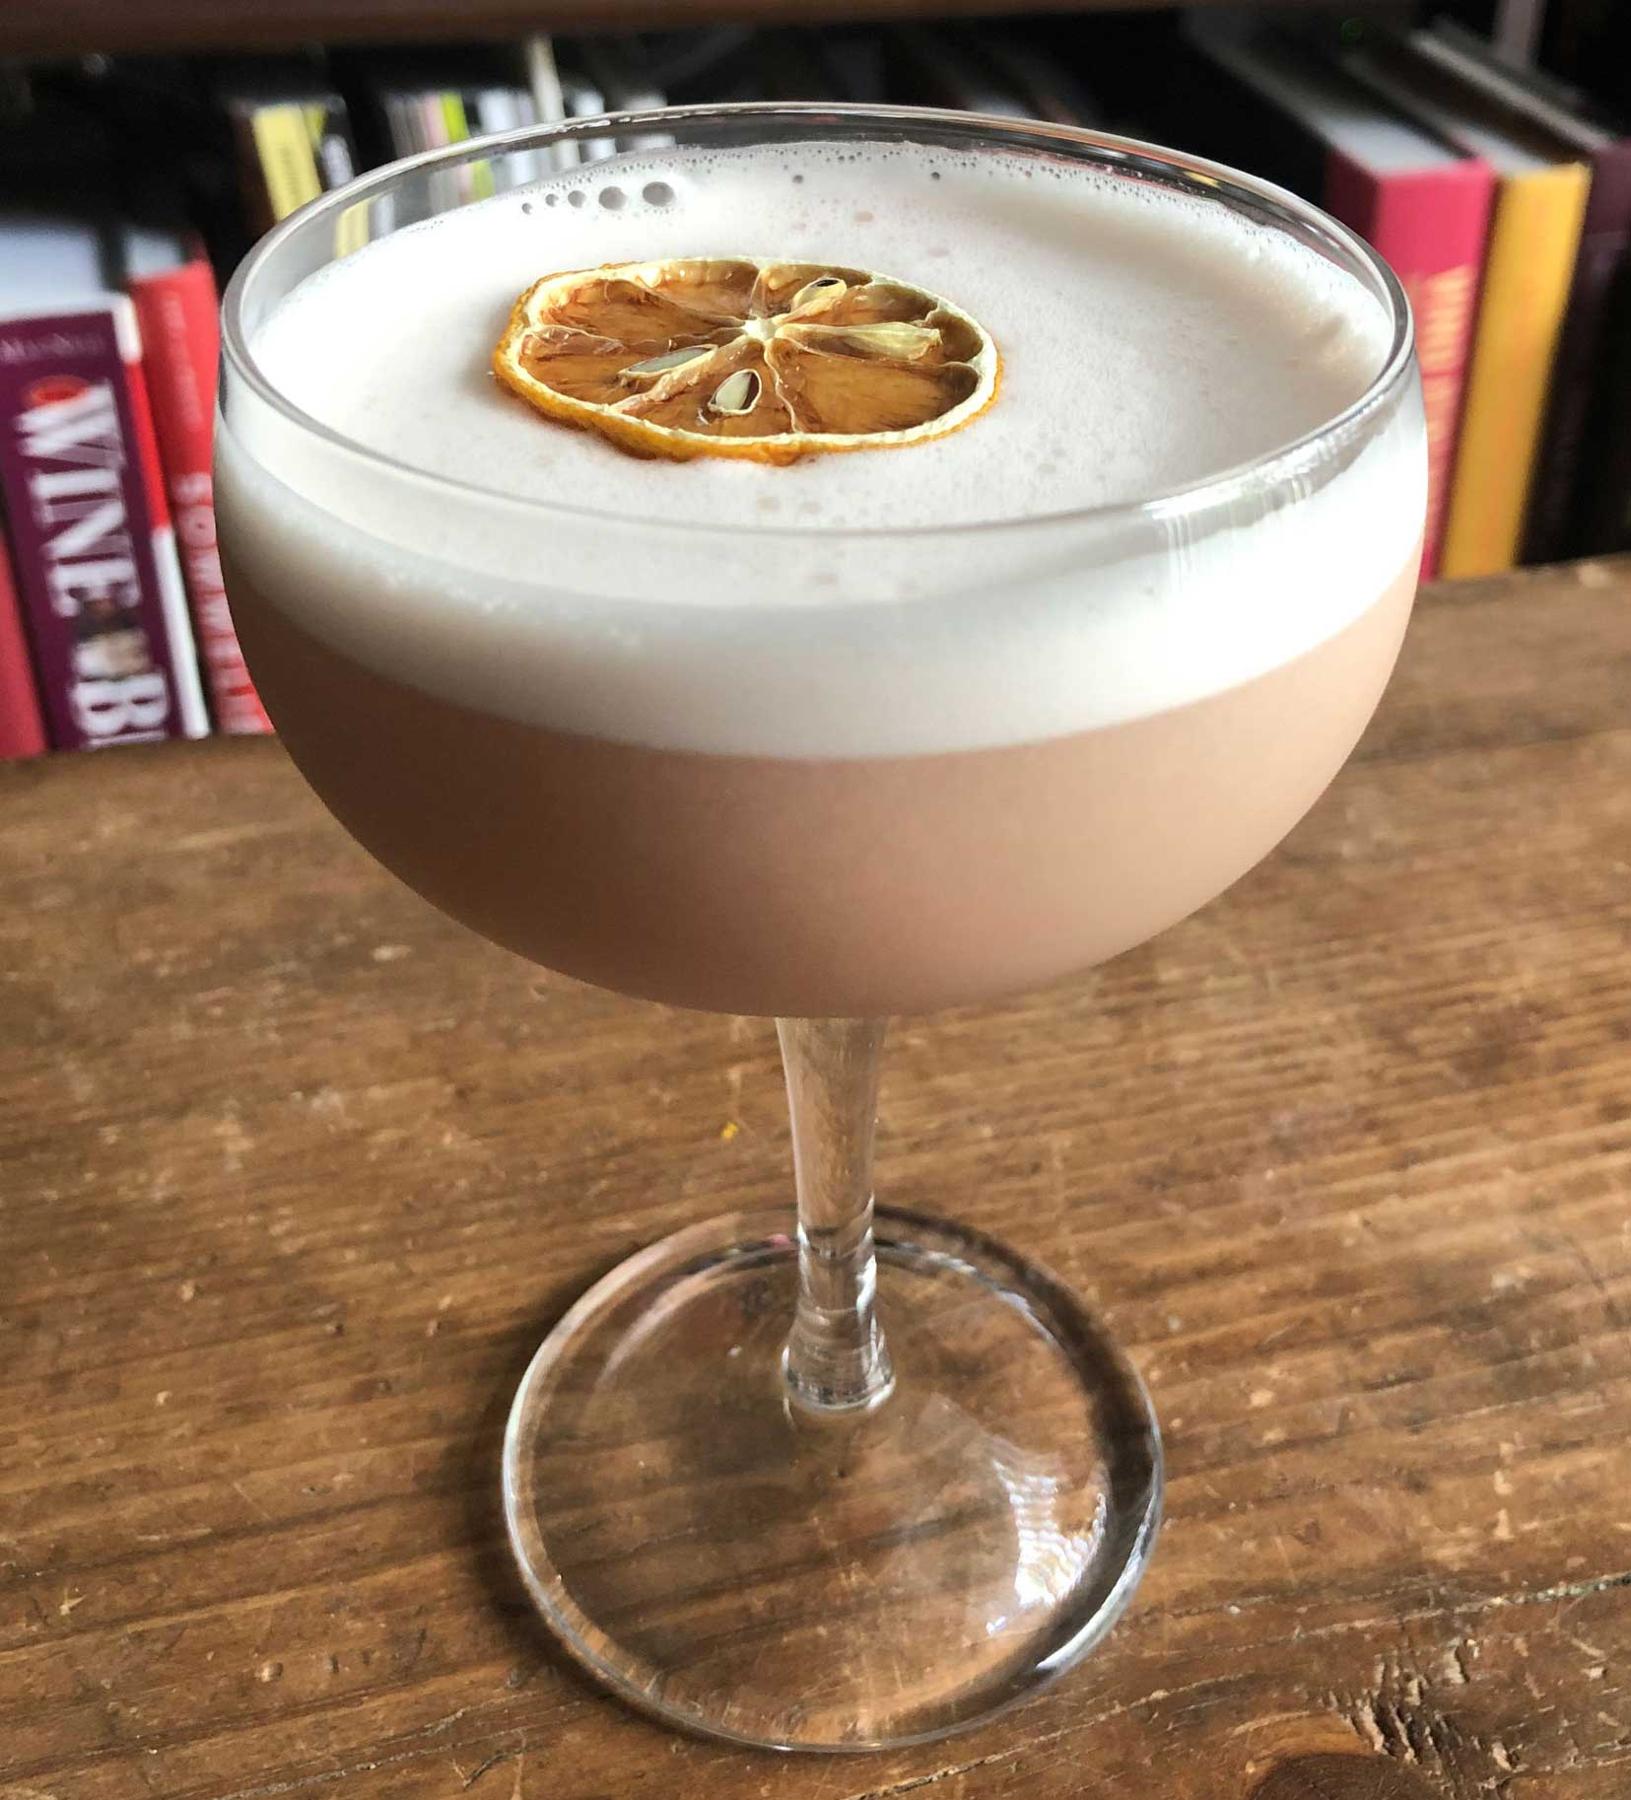 An example of the Ocean Shore, the mixed drink (drink), by Boothby, featuring Hayman’s Royal Dock Navy Strength Gin, Hayman’s Sloe Gin, egg white, orgeat, lemon juice, and lemon twist; photo by Lee Edwards